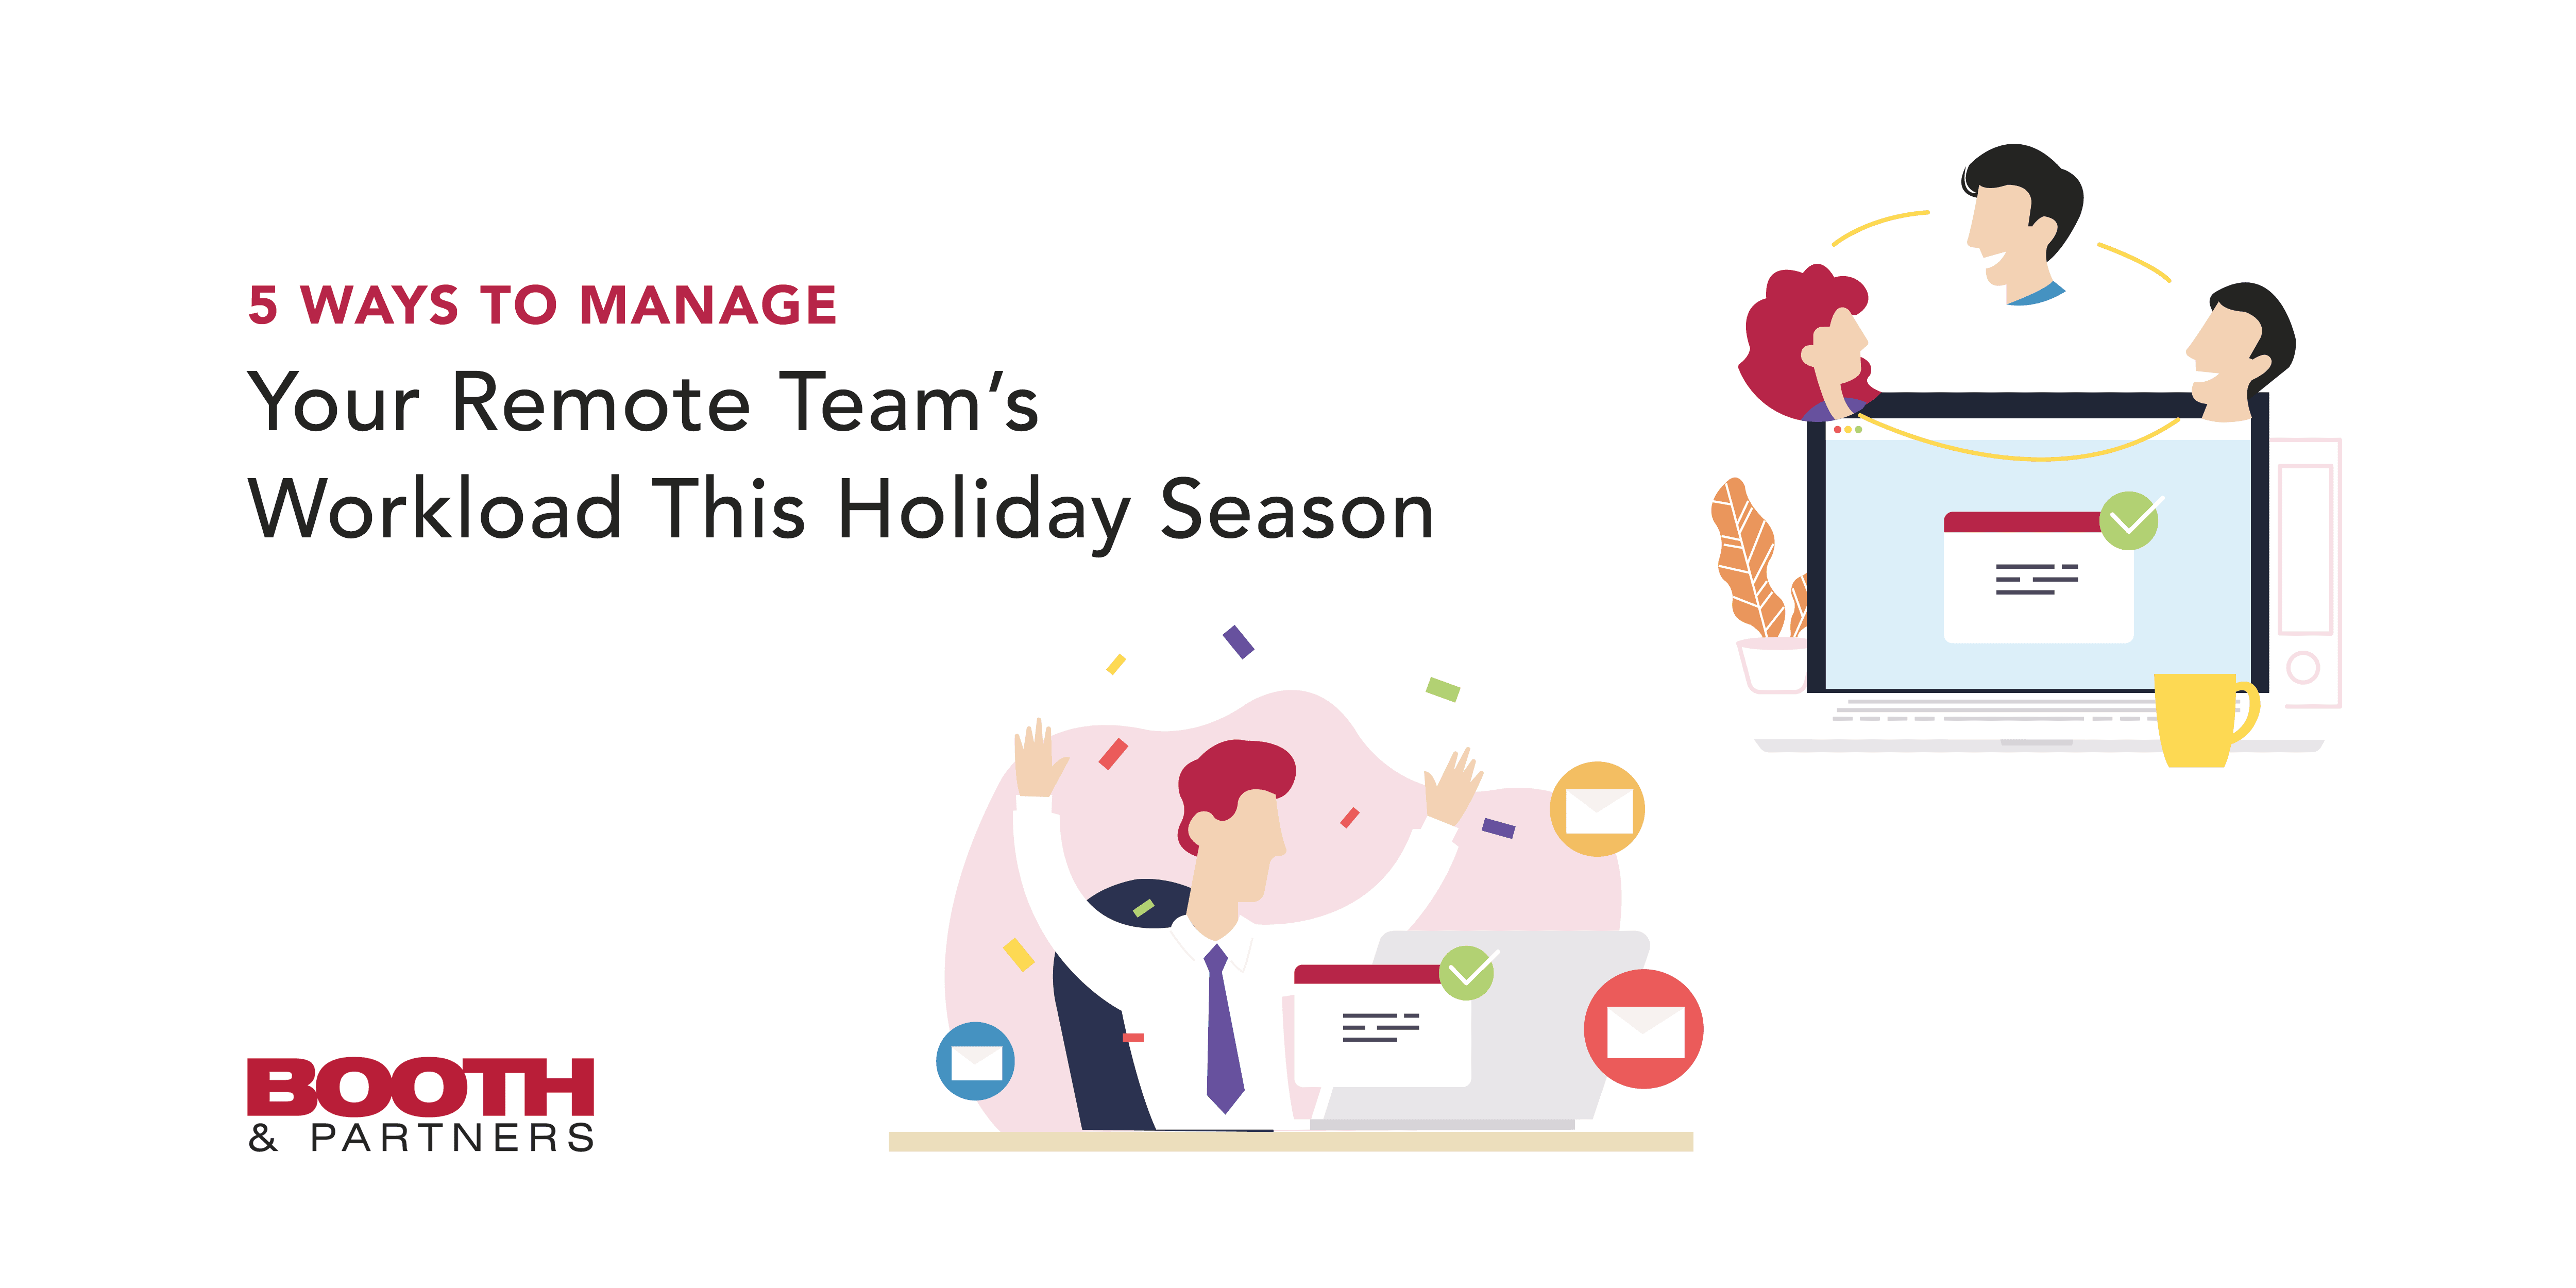 5 Ways To Manage Your Remote Team’s Workload This Holiday Season